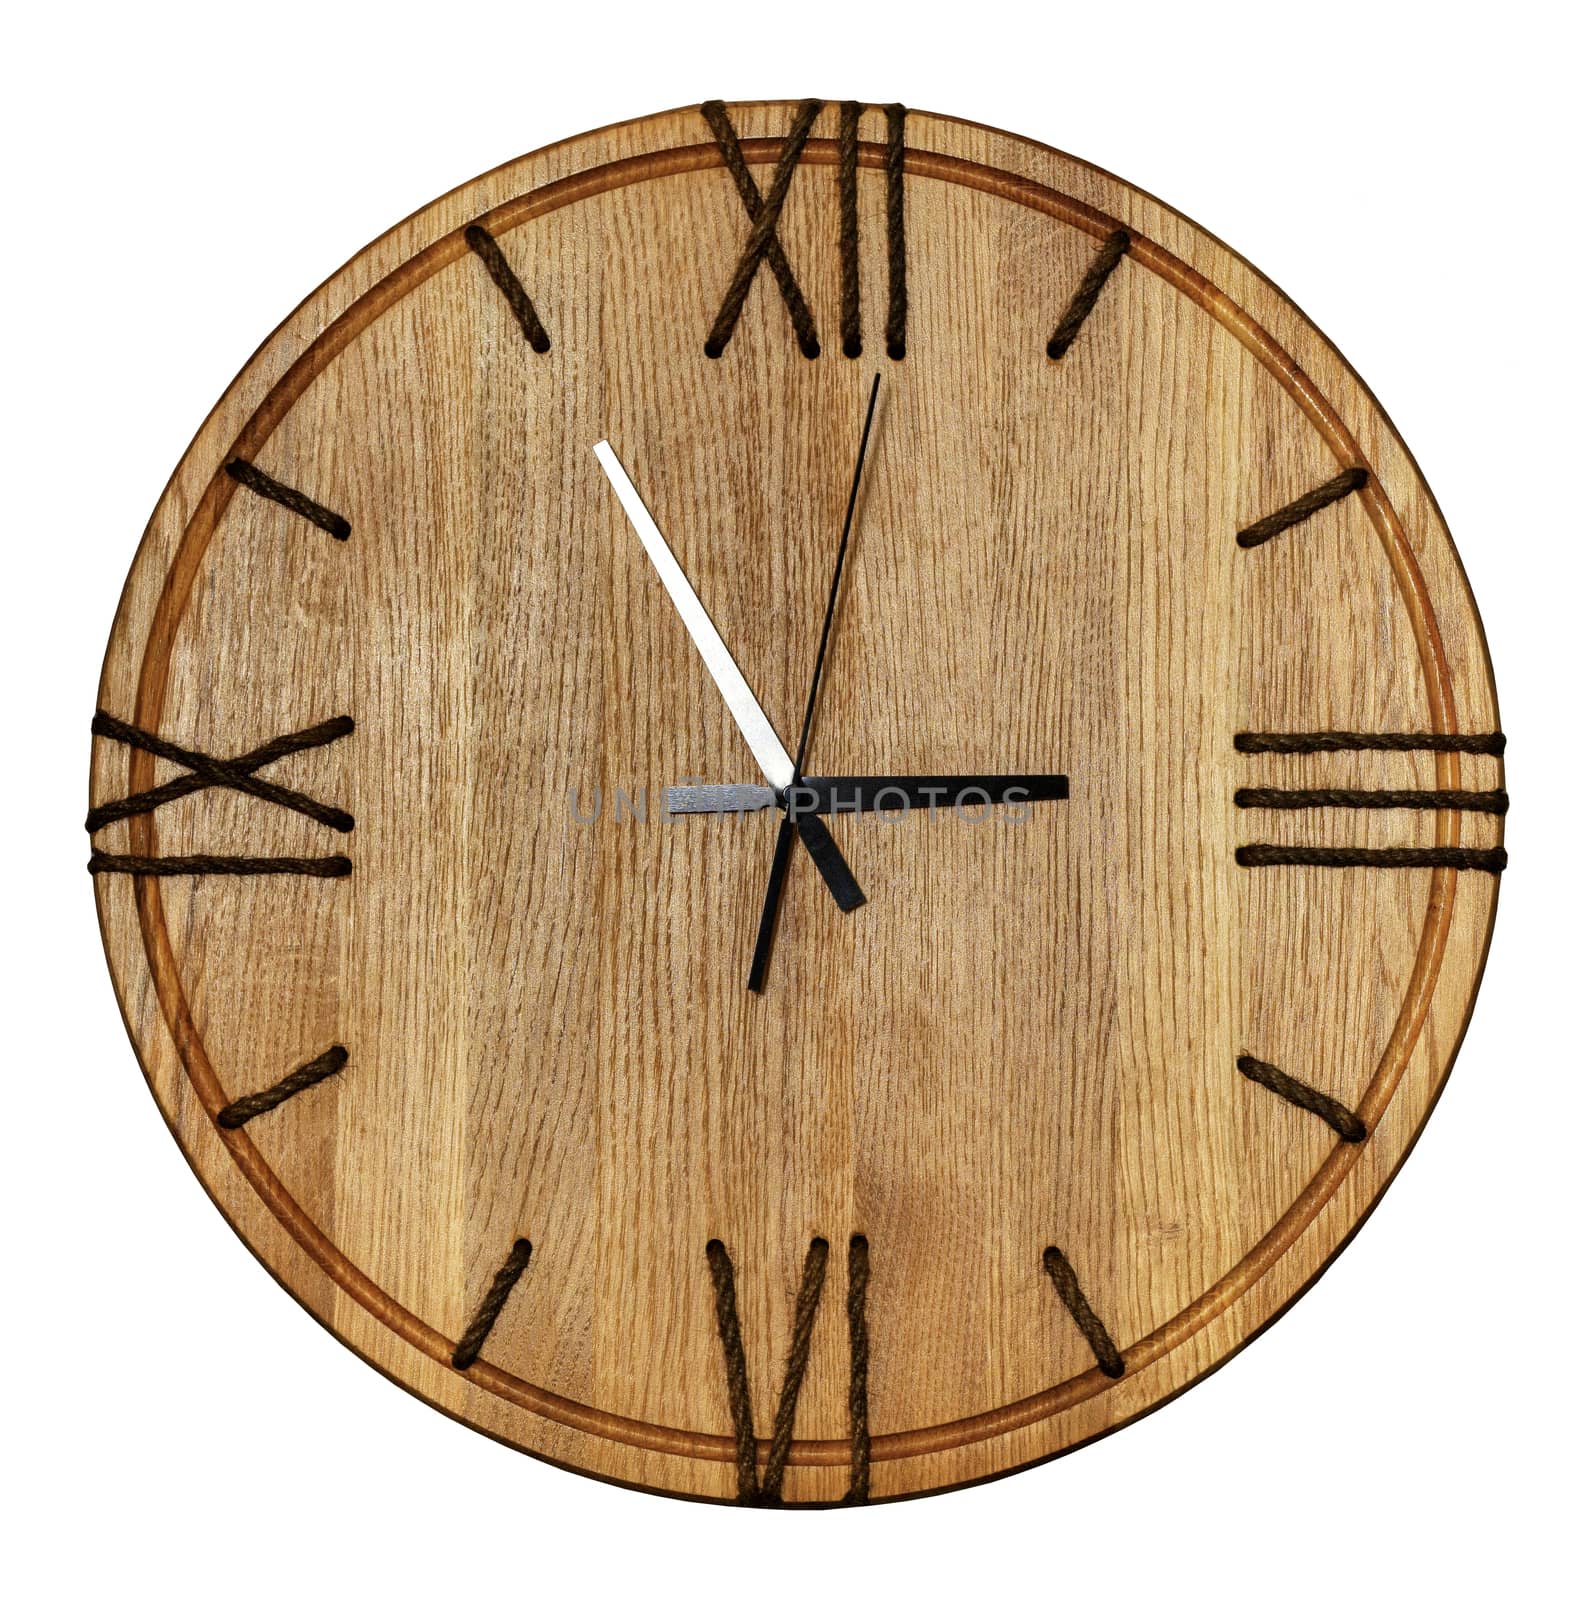 Beautiful wooden wall clock made of light wood and twine, isolate on white background. by Sergii